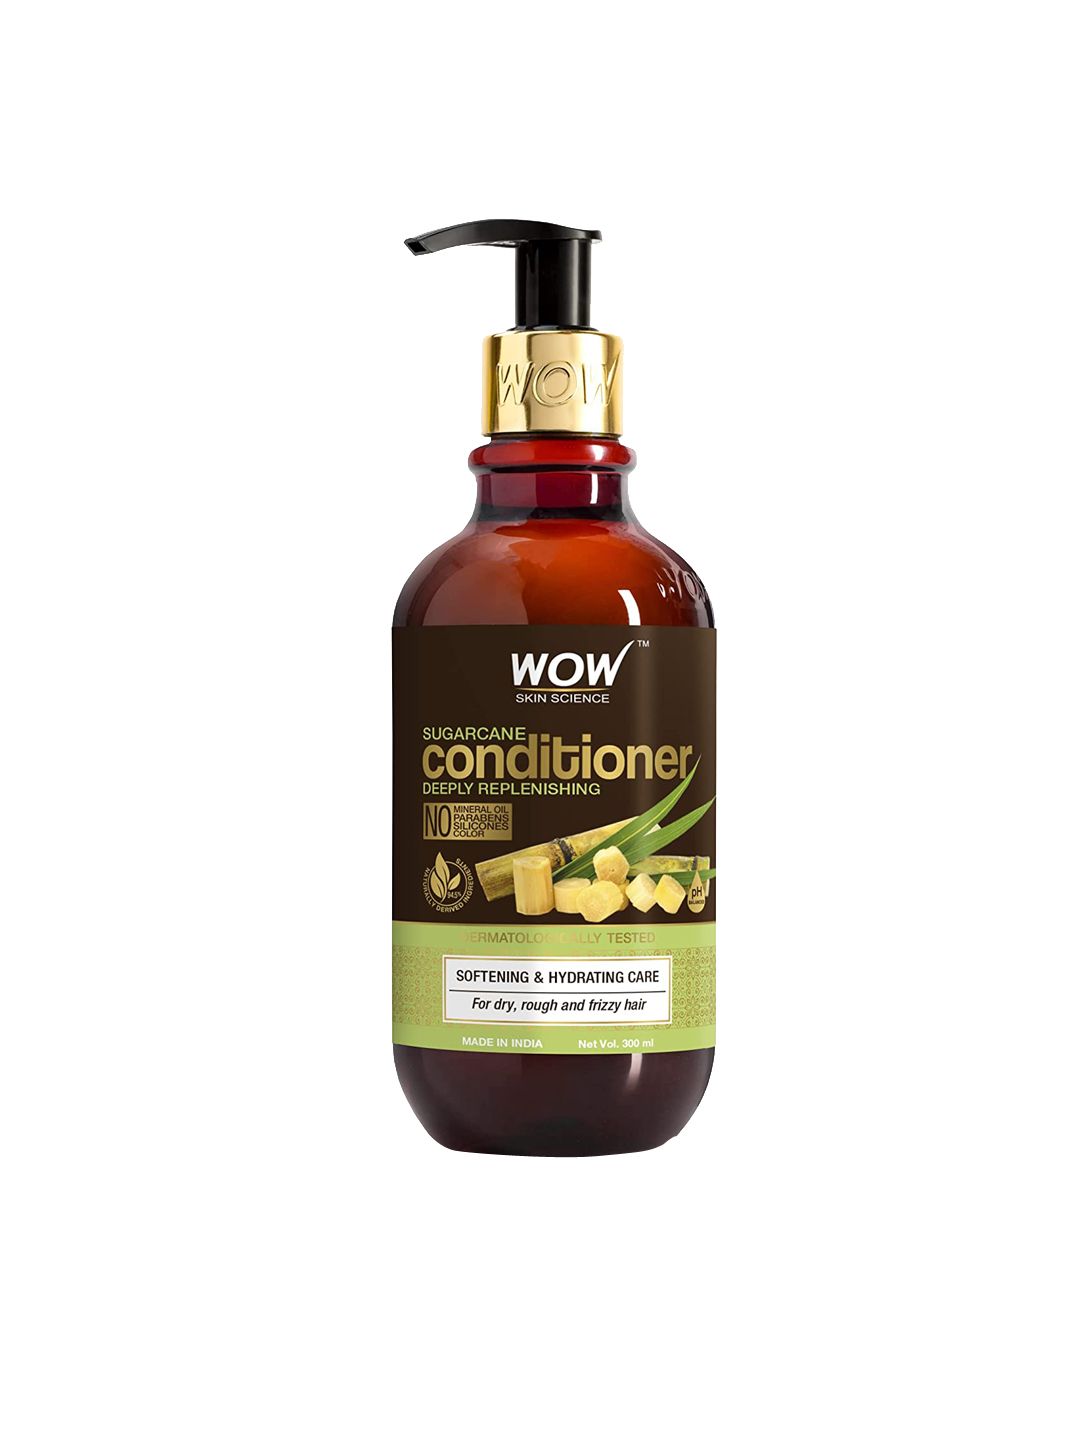 WOW SKIN SCIENCE Sugarcane Deeply Replenishing Conditioner for Dry & Frizzy Hair - 300ml Price in India